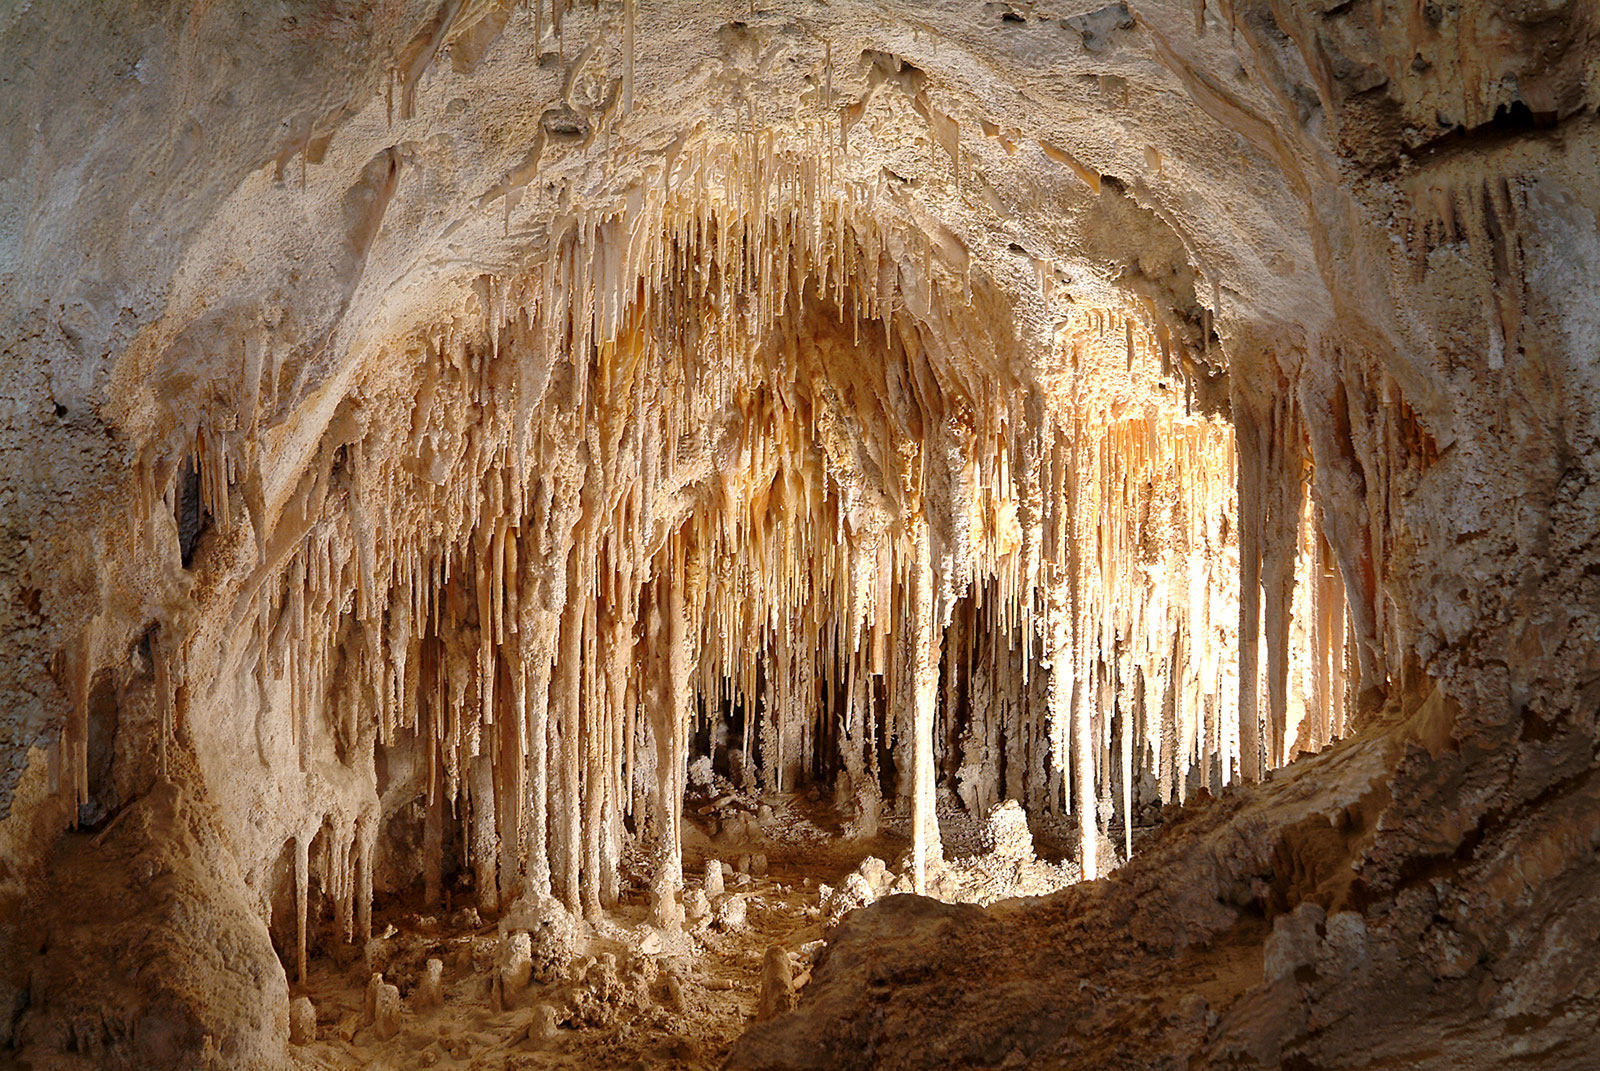 Carlsbad Caverns USA- Located in what is now New Mexico, the Carlsbad Caverns National Park is home to many impressive caves, all of which were created between 4-6 million years ago. Sulfuric acid formed from mixed water dissolved the area's limestone, widening cracks in the rock and eventually creating the caves we know today. What makes these caves truly notable, though, are the massive deposits of gypsum, clay, and silt, whose presence gives the caves a fantastical and almost cartoonish look.